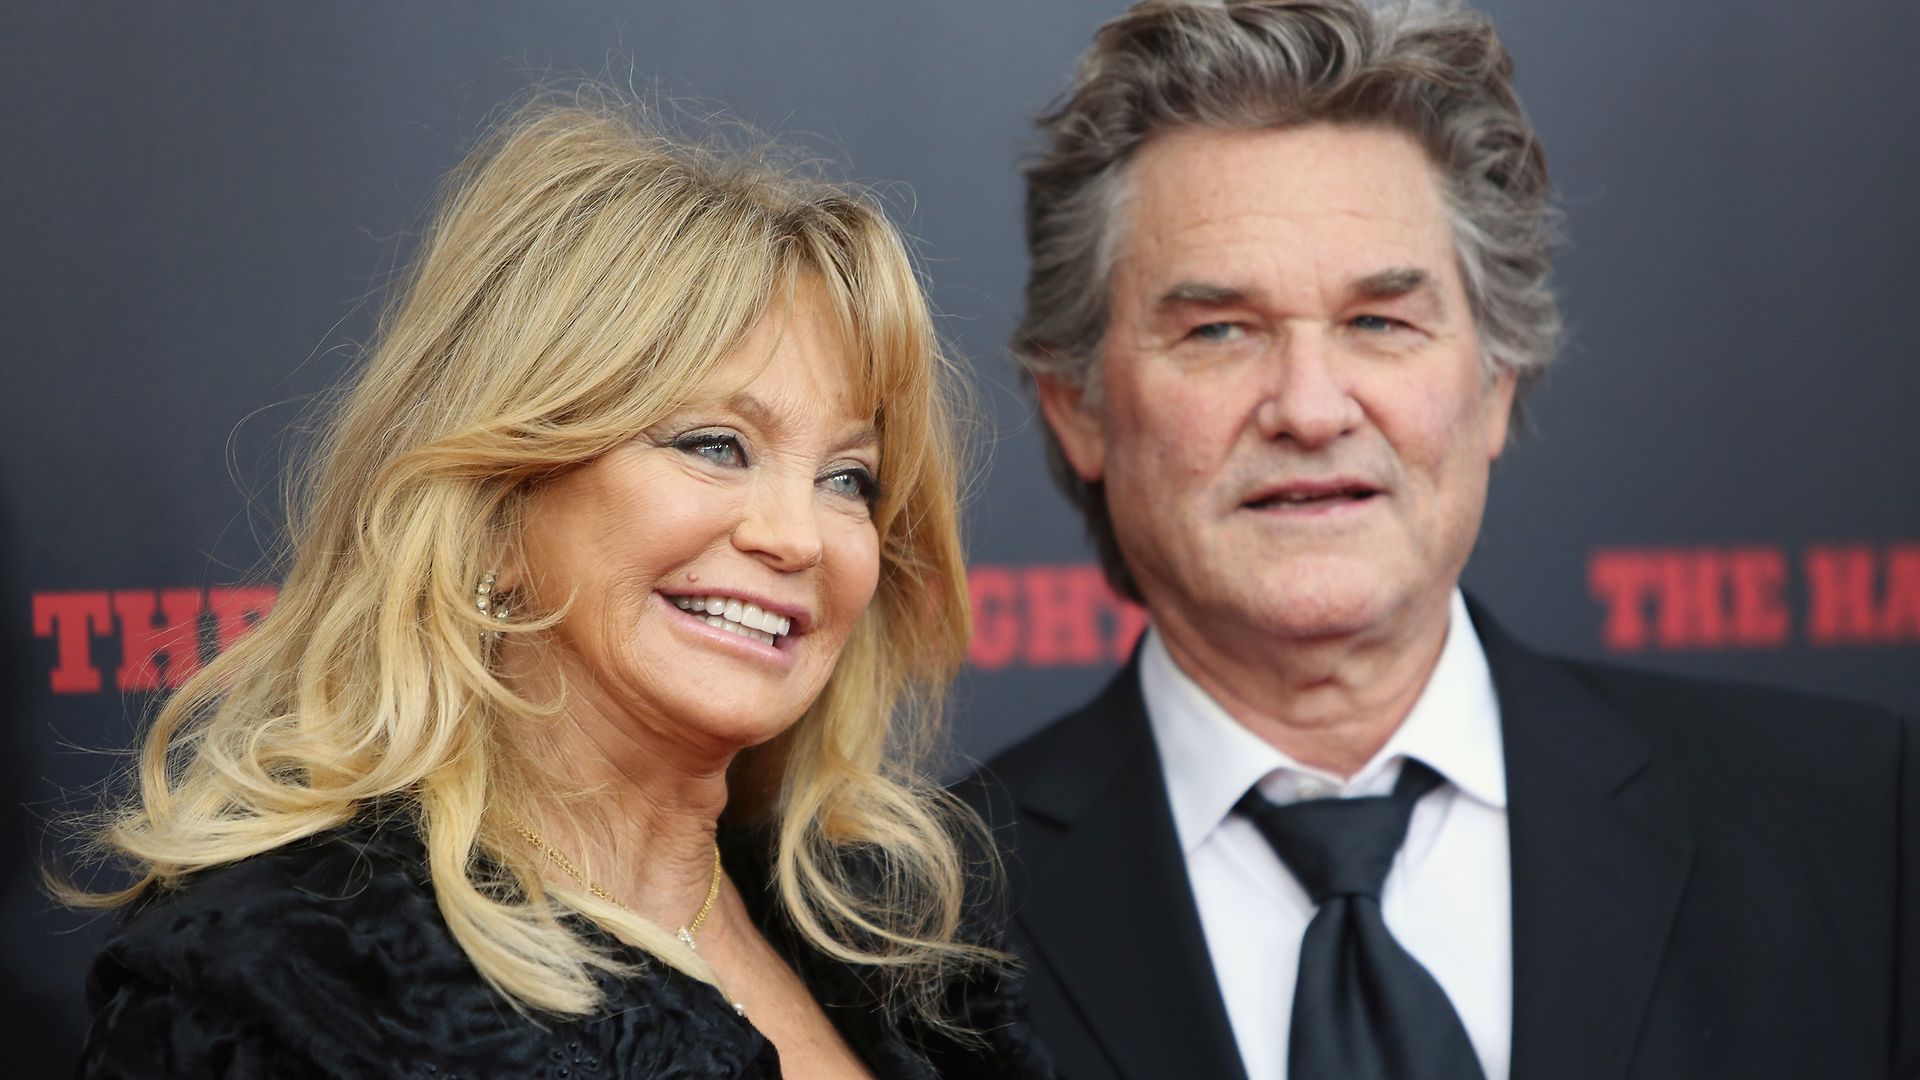 Goldie Hawn and Kurt Russell on the red carpet 